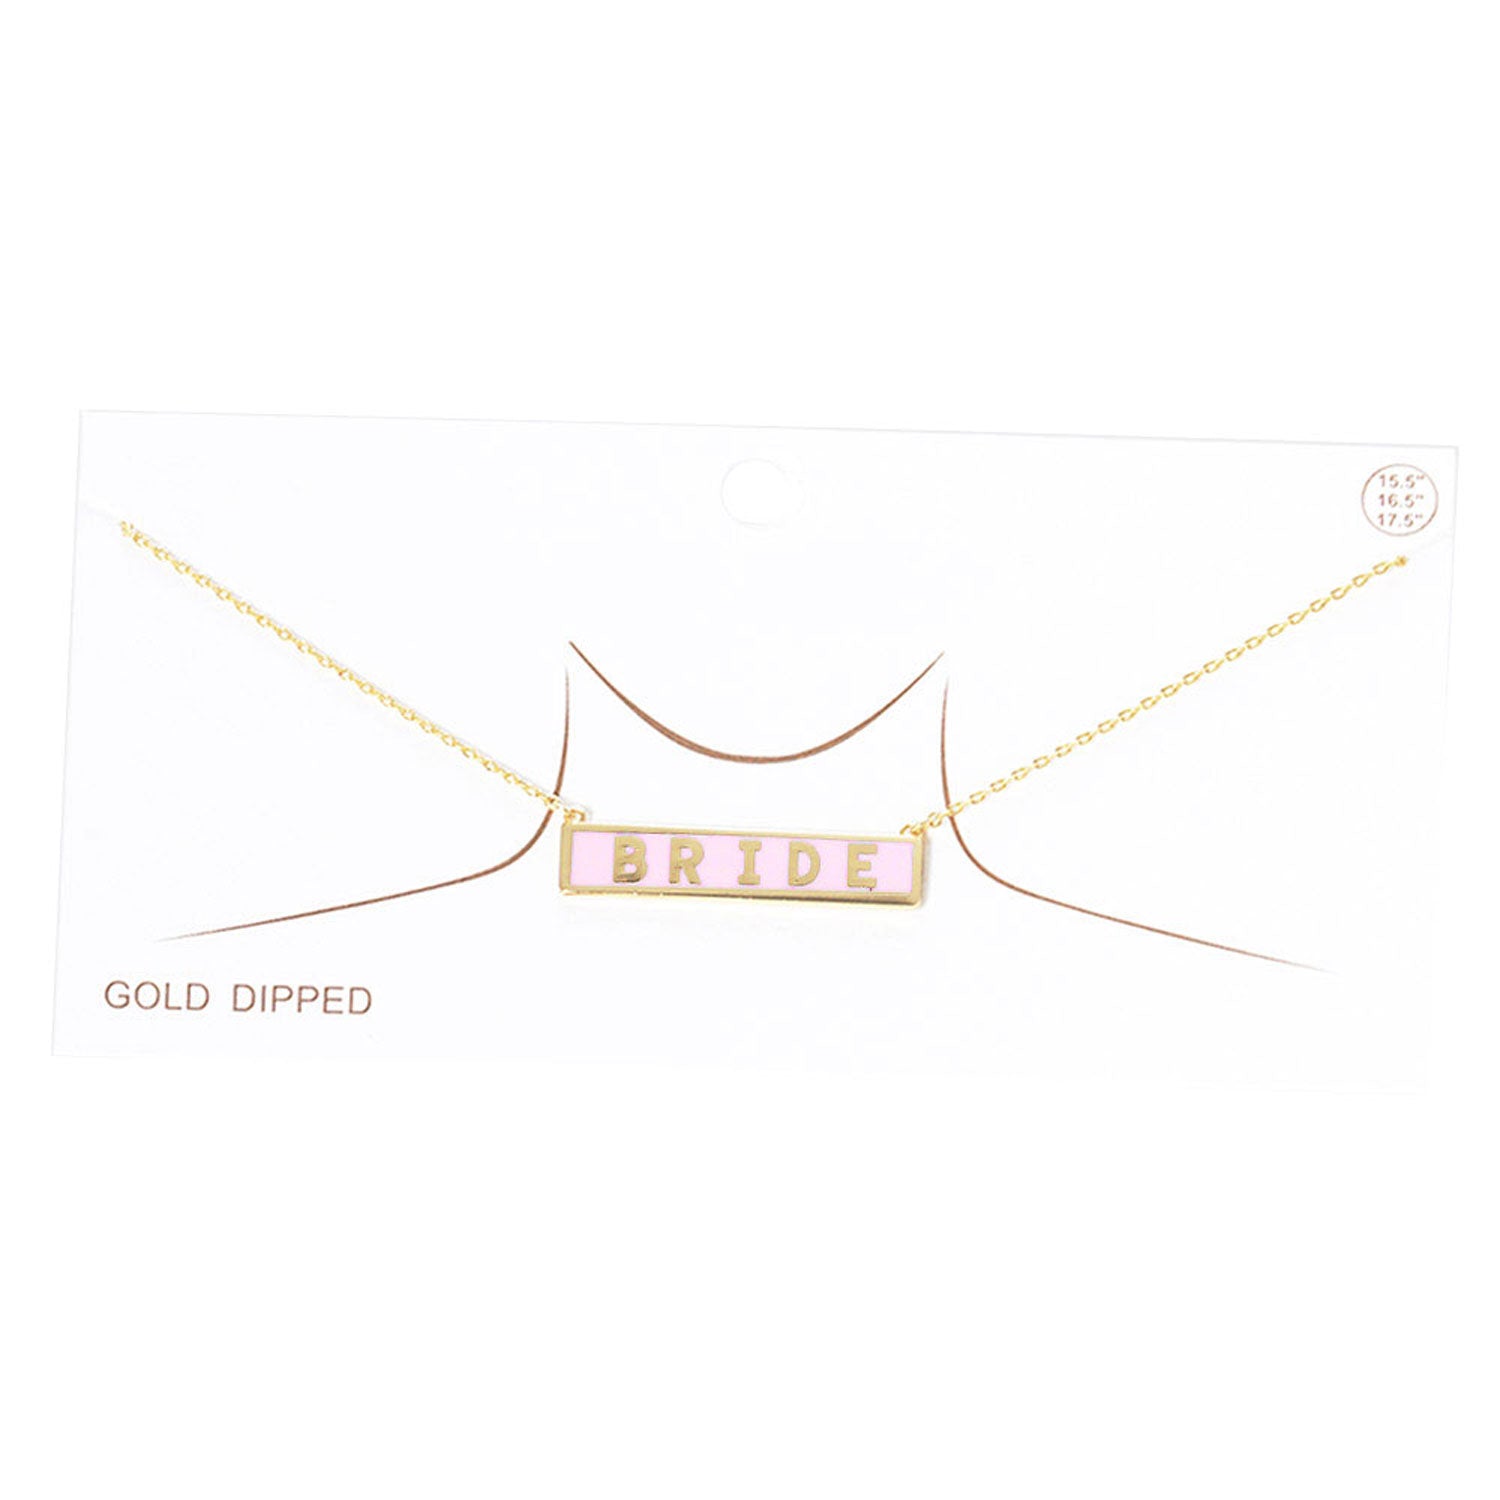 Pink Bride Gold Dipped Enamel Rectangle Message Pendant Necklace, these bridal dipped necklace can light up any outfit, This piece is versatile and goes with practically anything! Make your wife feel special by giving this pendant necklace as a gift and expressing your love for your wife on this special ocaassion. This  Pendant Necklace is perfect gift for all the special women in your life, be it mother, wife, sister or daughter.